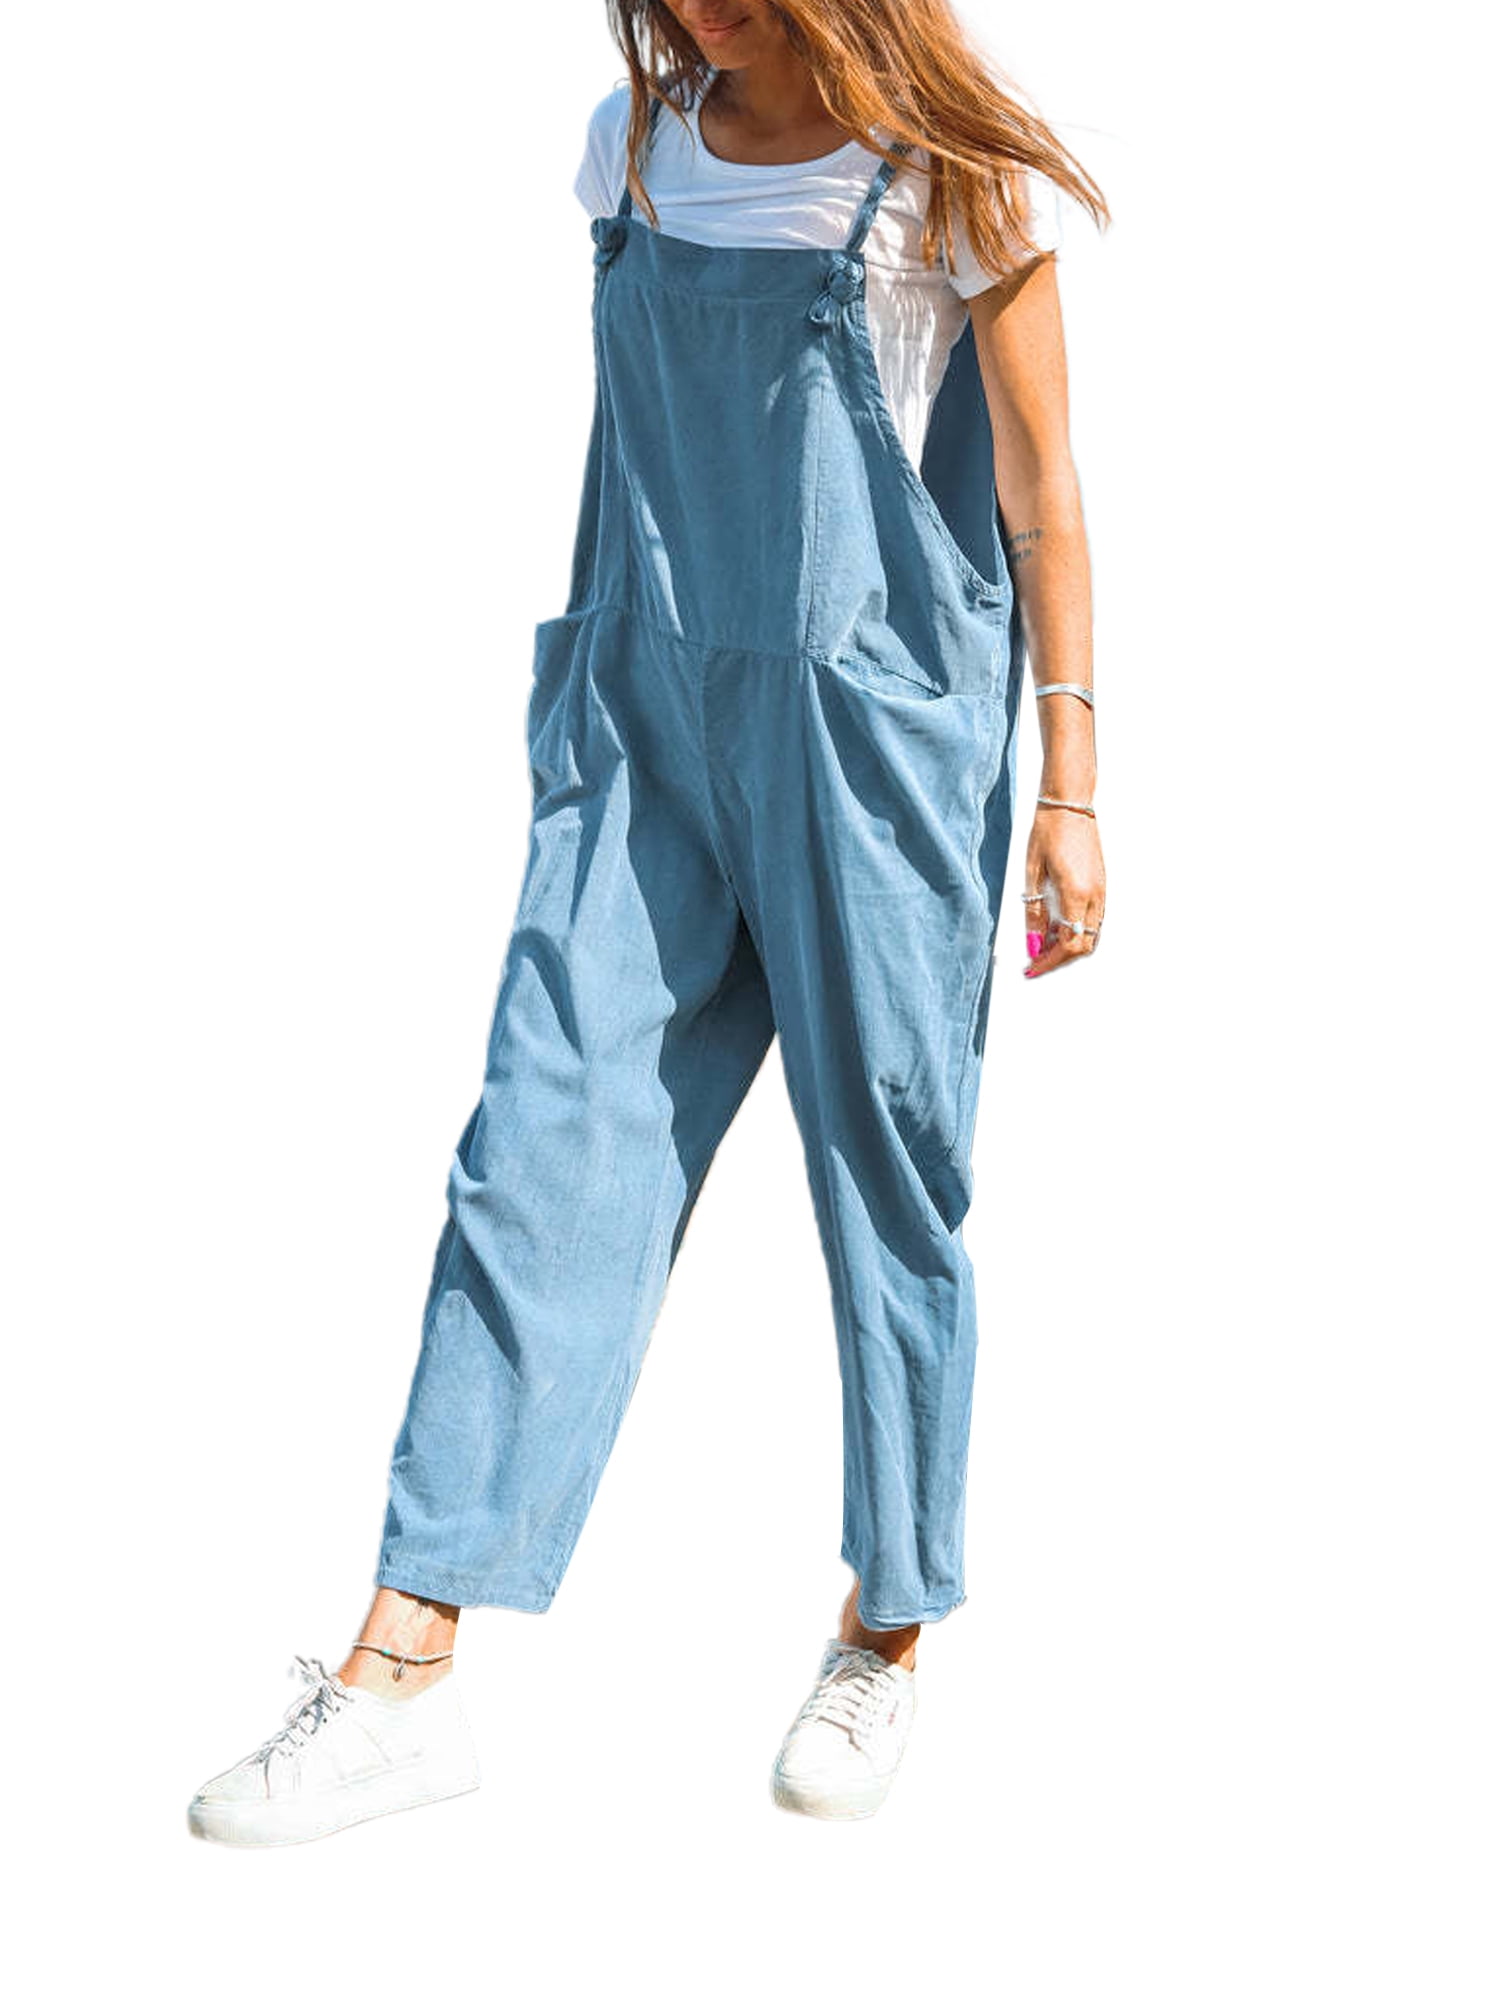 Wassery Women's Juniors Long Jumpsuit Pants Casual Sleeveless Solid Color  Baggy Romper Wide Leg Bib Pants Overalls with Pockets Streetwear for Teen  Girls 